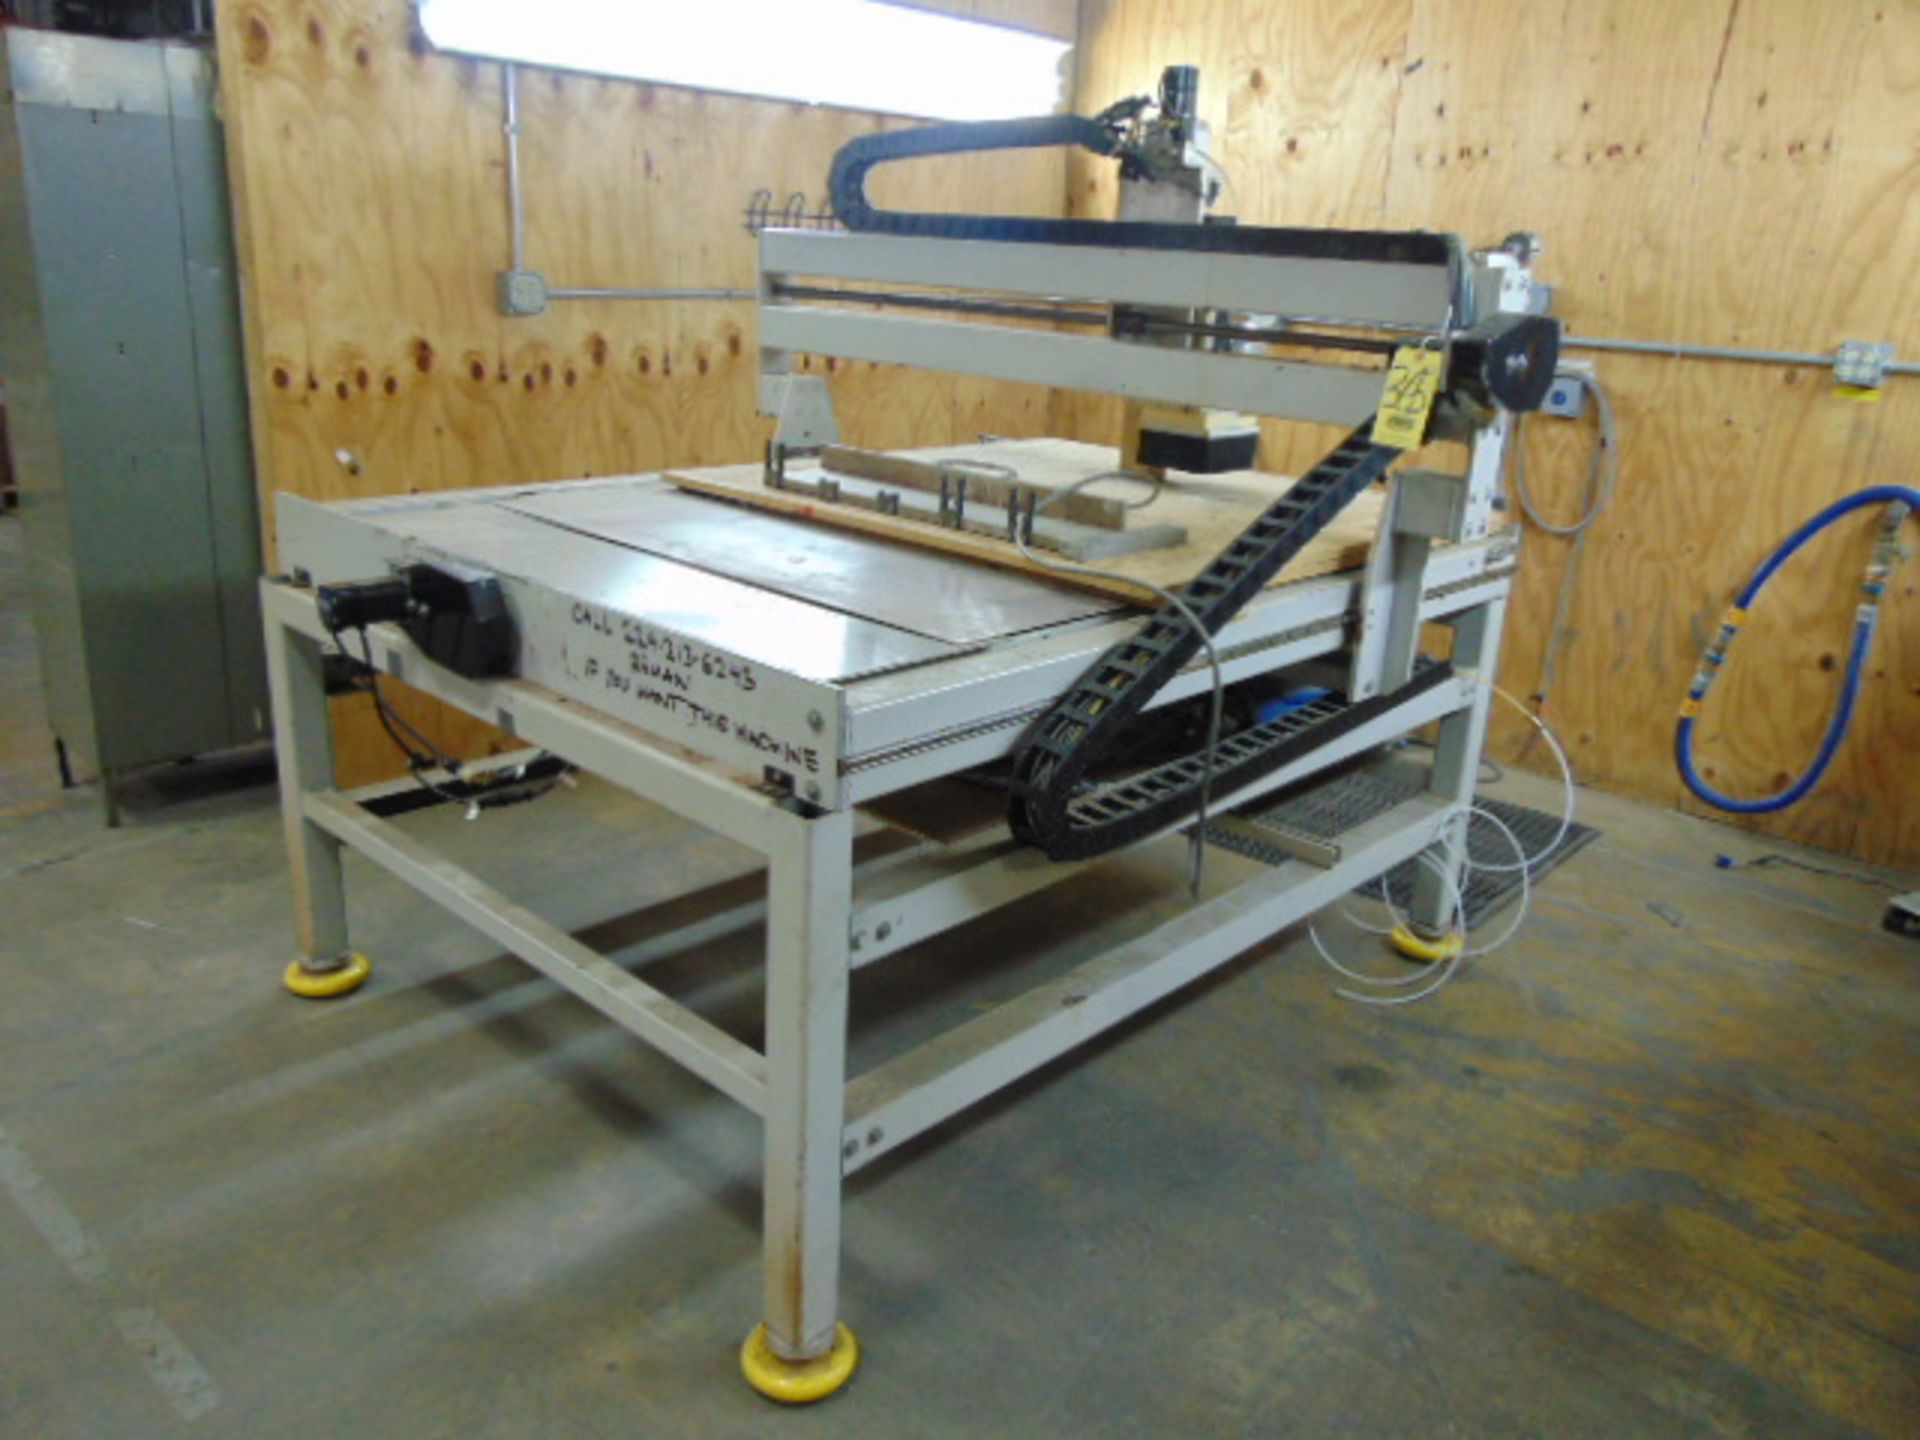 PROGRAMMABLE ROUTER TABLE, SHOP SABRE MDL. 4860 (no computer)